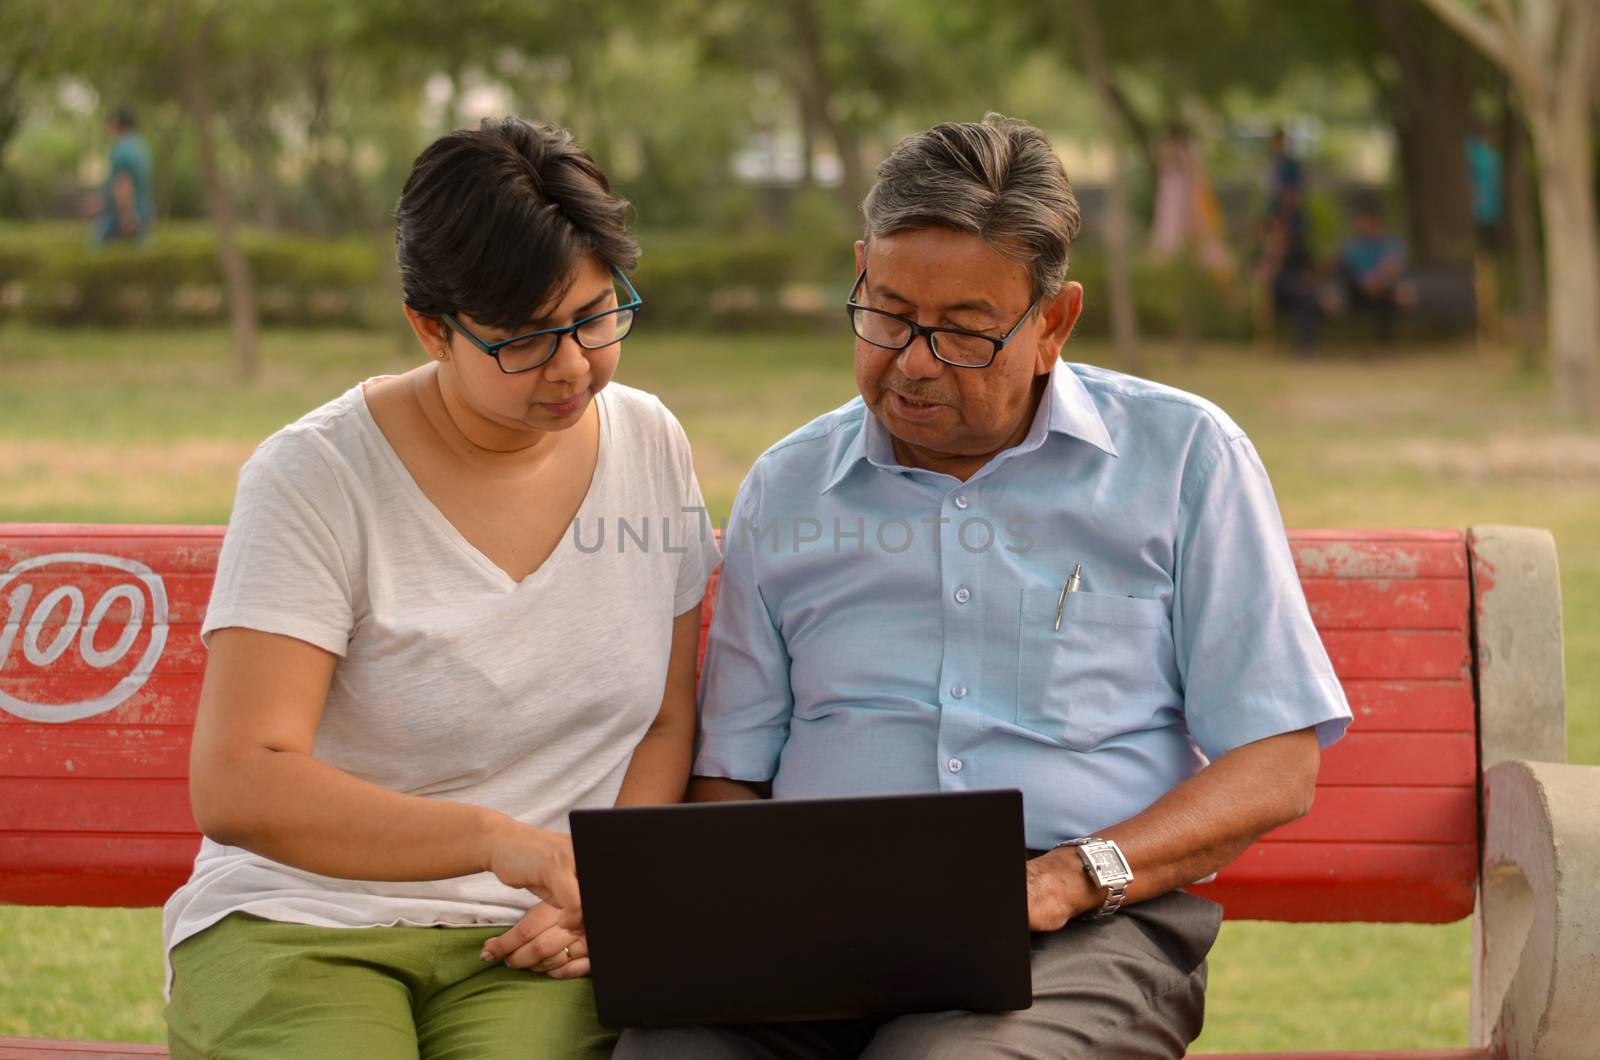 Young Indian woman manager in western formals / shirt helping old Indian man on a laptop promoting digital literacy for elderly in a park in New Delhi, India.Concept: father daughter/ Digital literacy